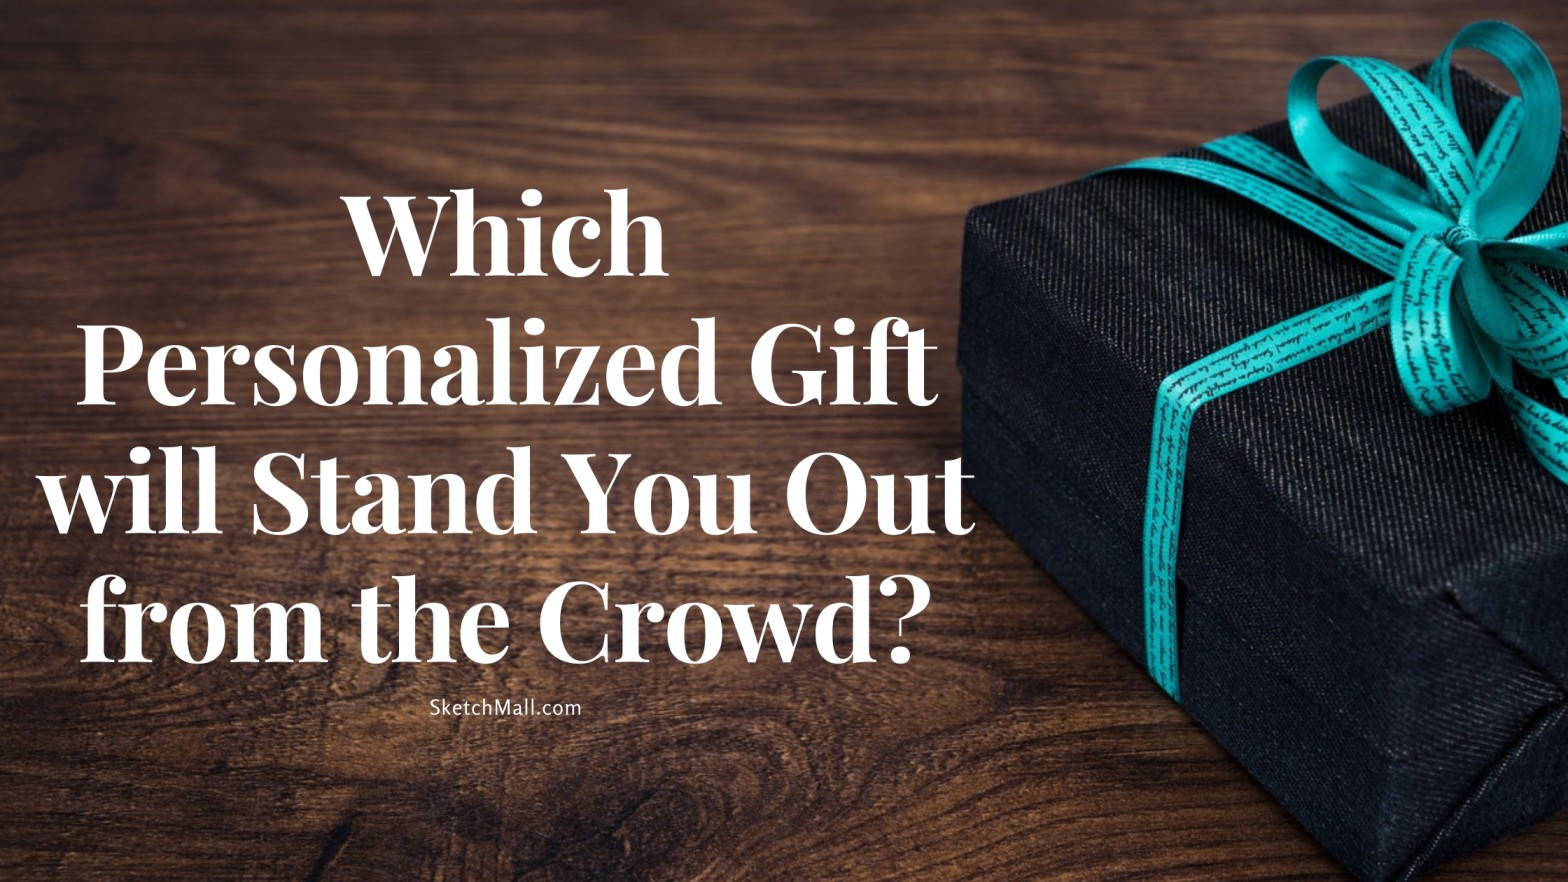 You are currently viewing Personalized Gift | Which One will Stand You Out from the Crowd?